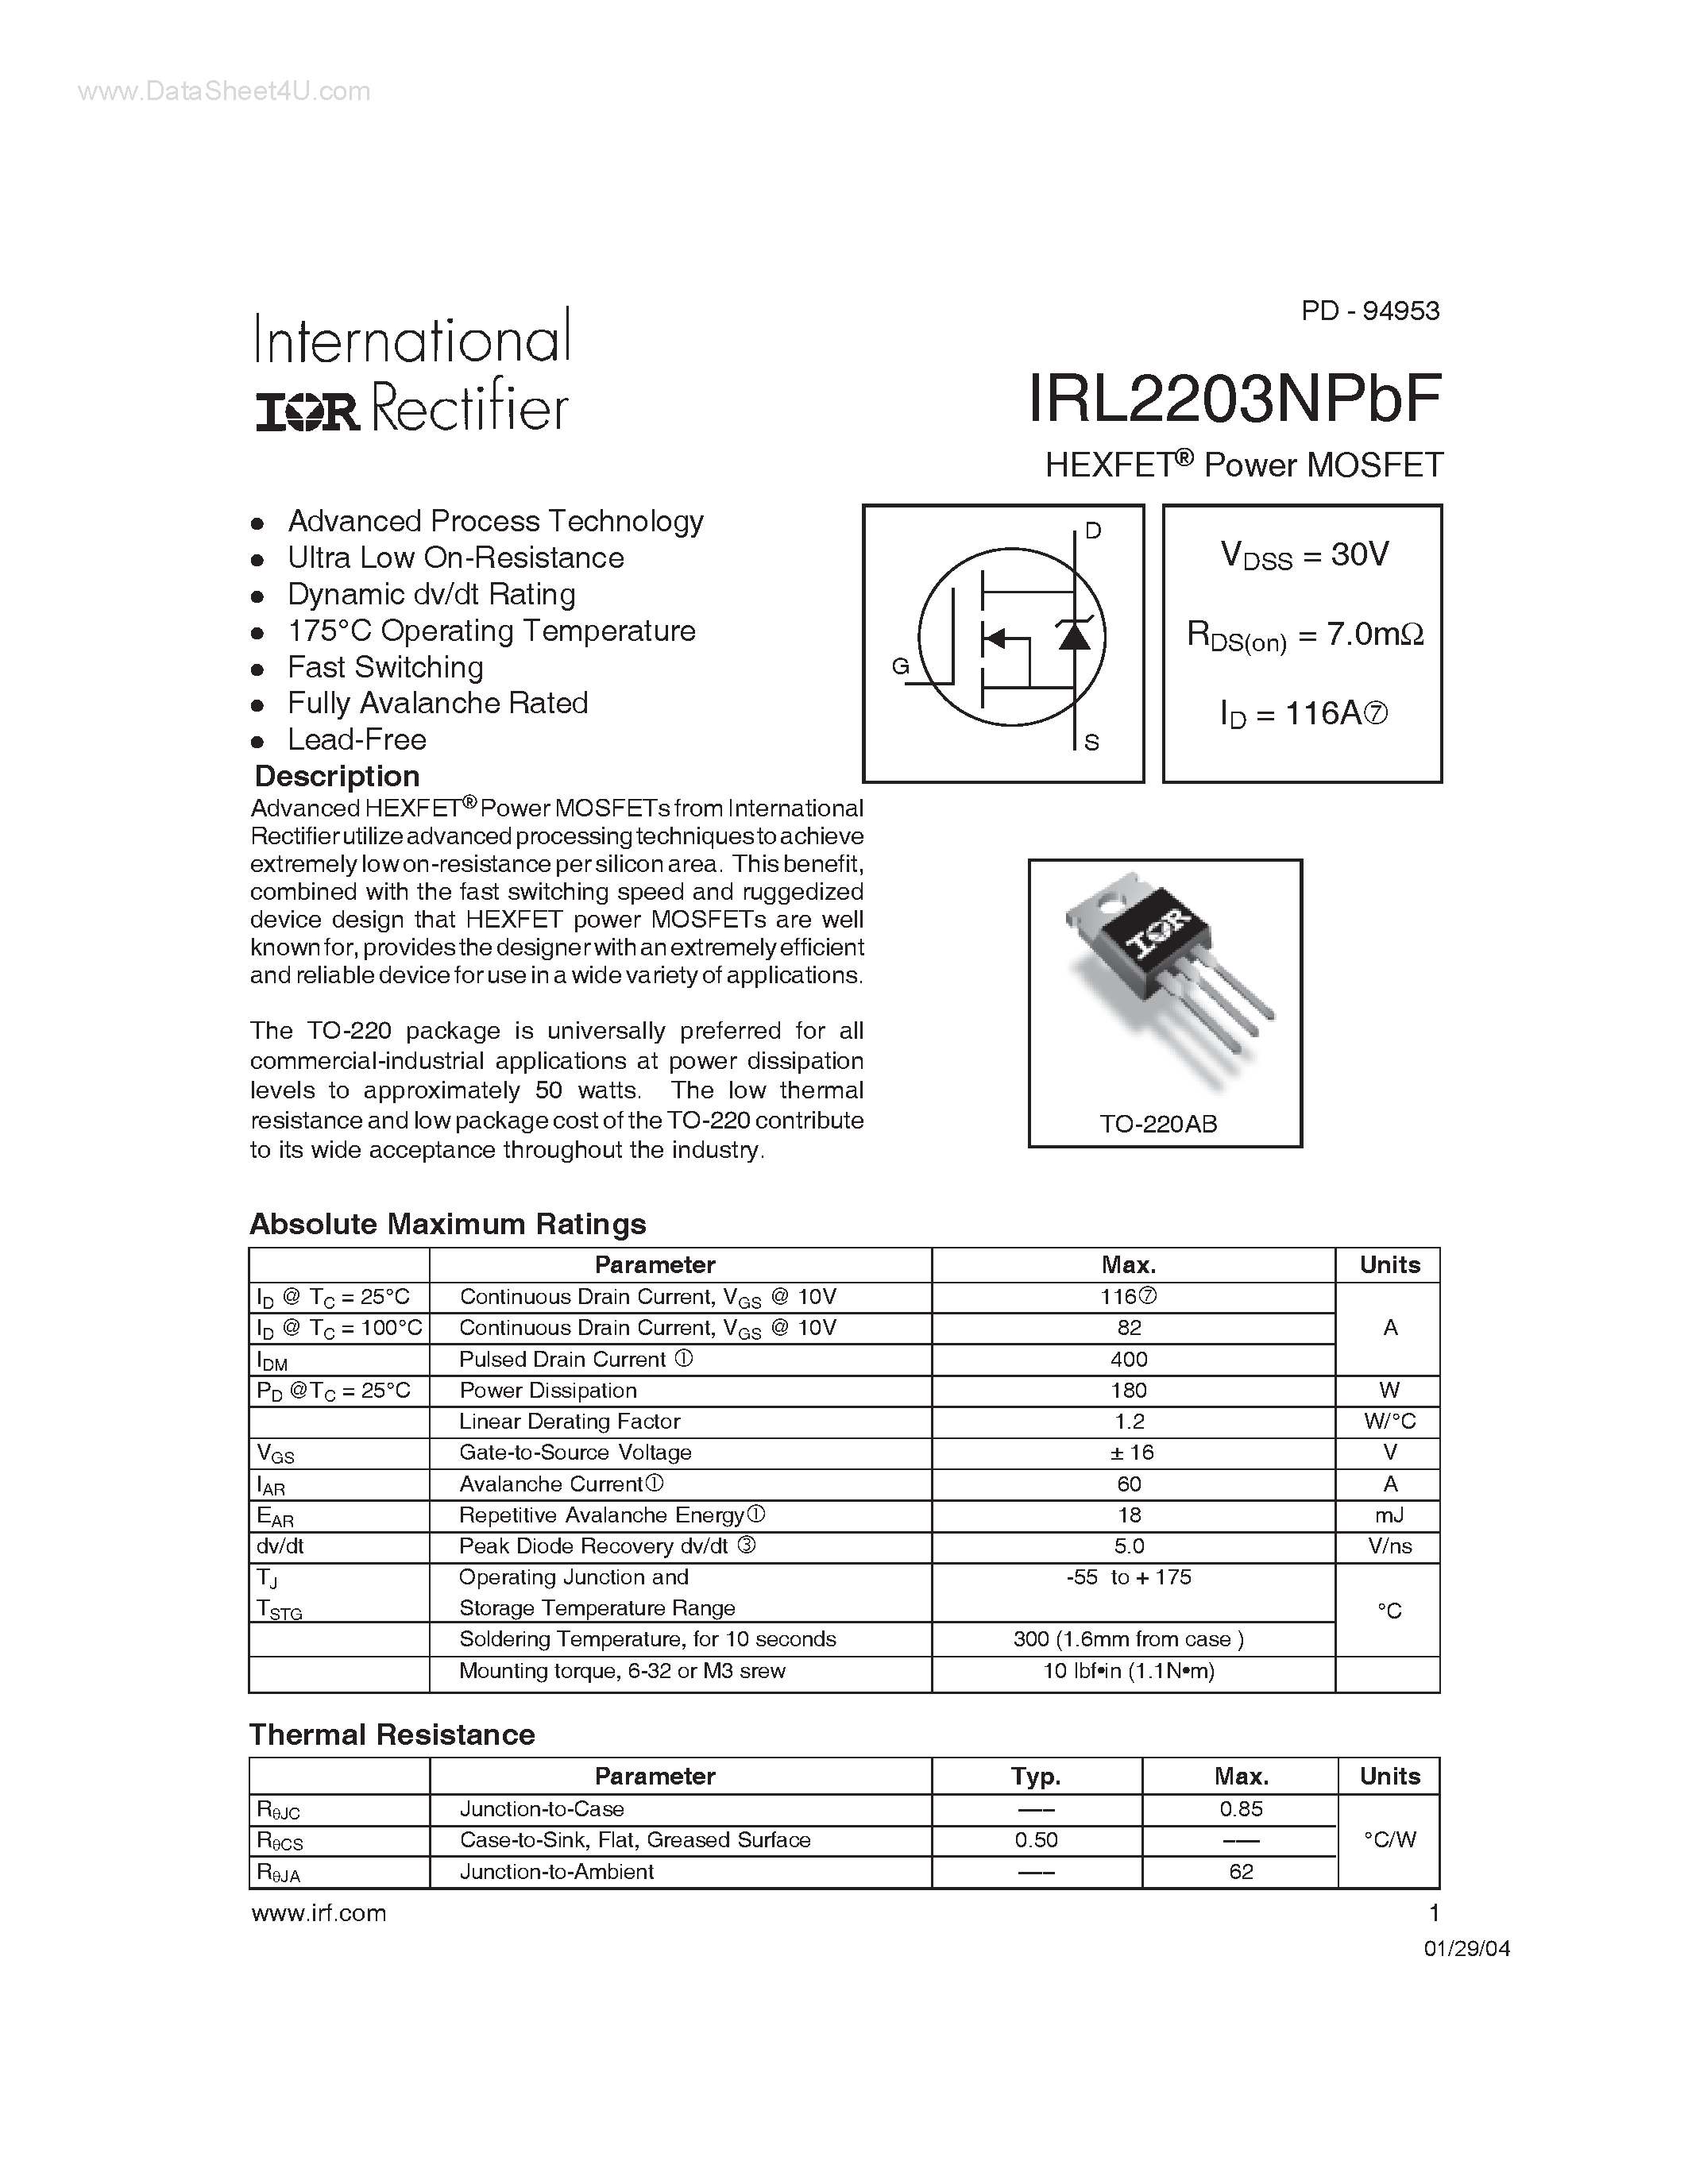 Datasheet IRL2203NPBF - Power MOSFET page 1